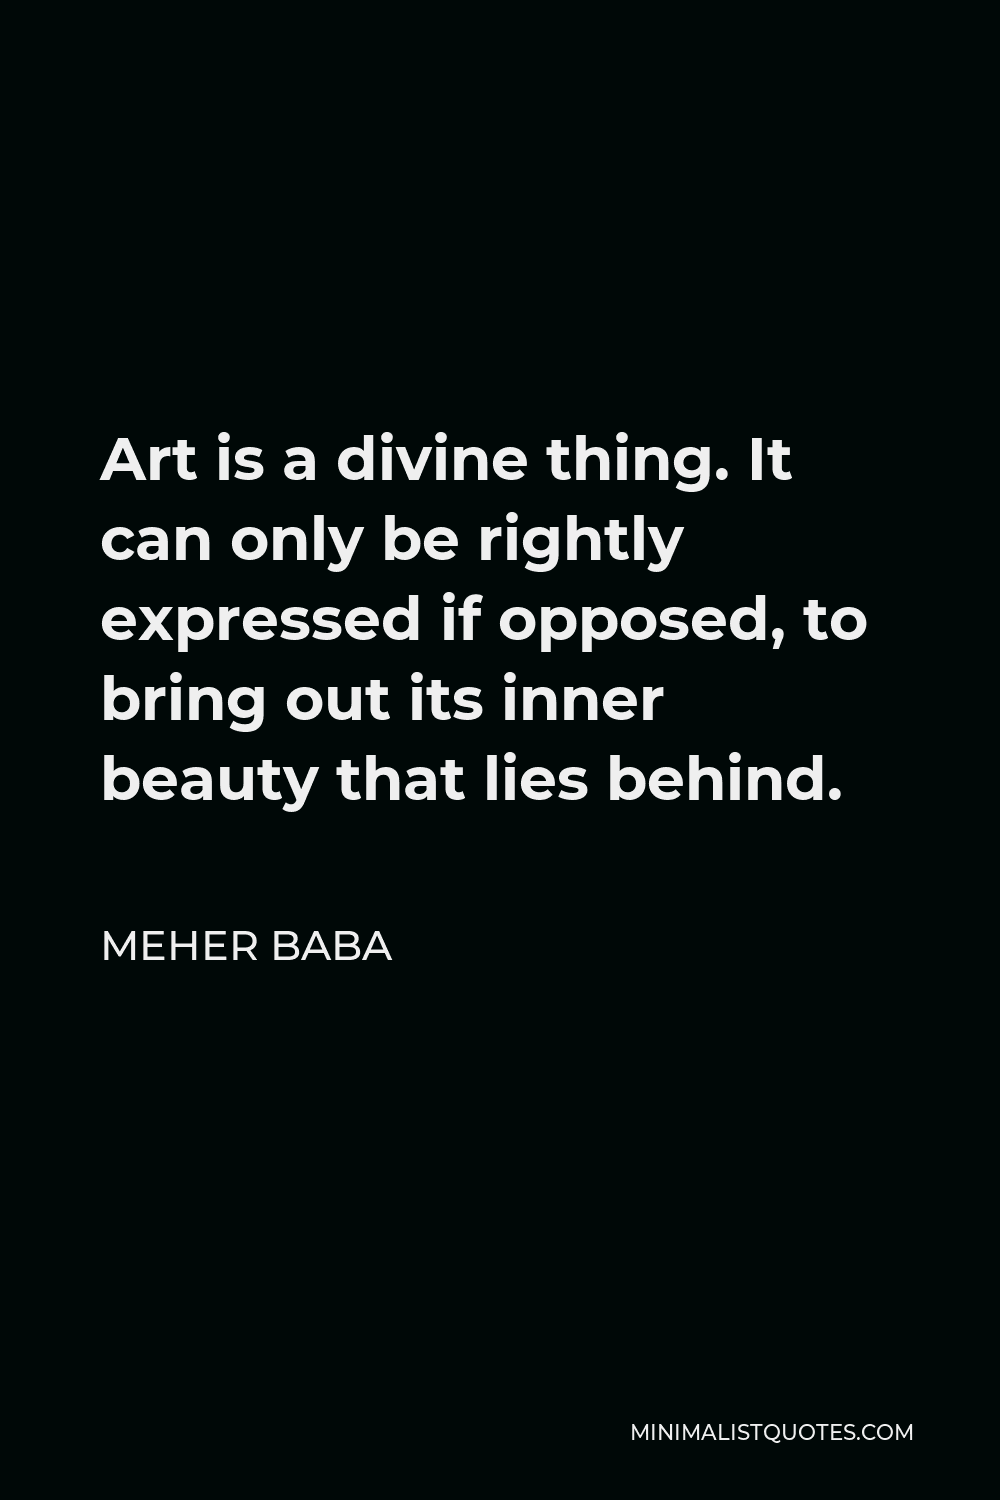 Meher Baba Quote - Art is a divine thing. It can only be rightly expressed if opposed, to bring out its inner beauty that lies behind.